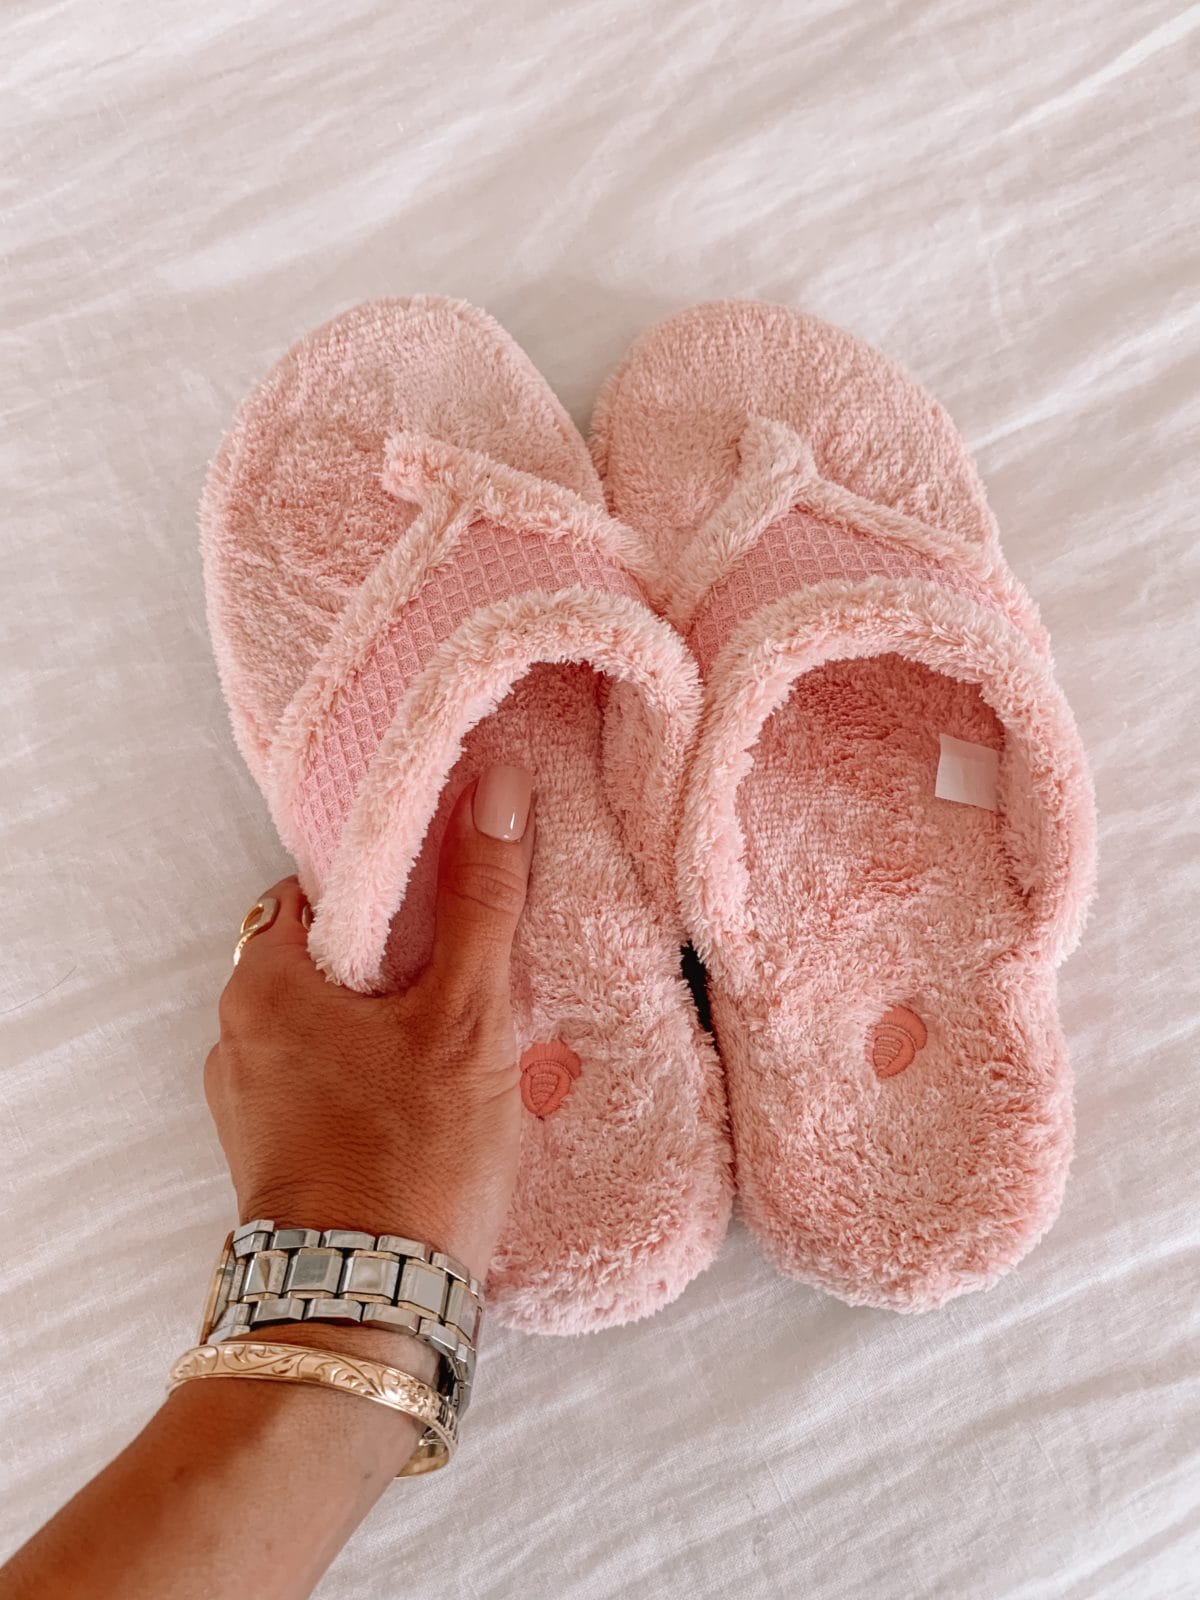 Spa Slippers